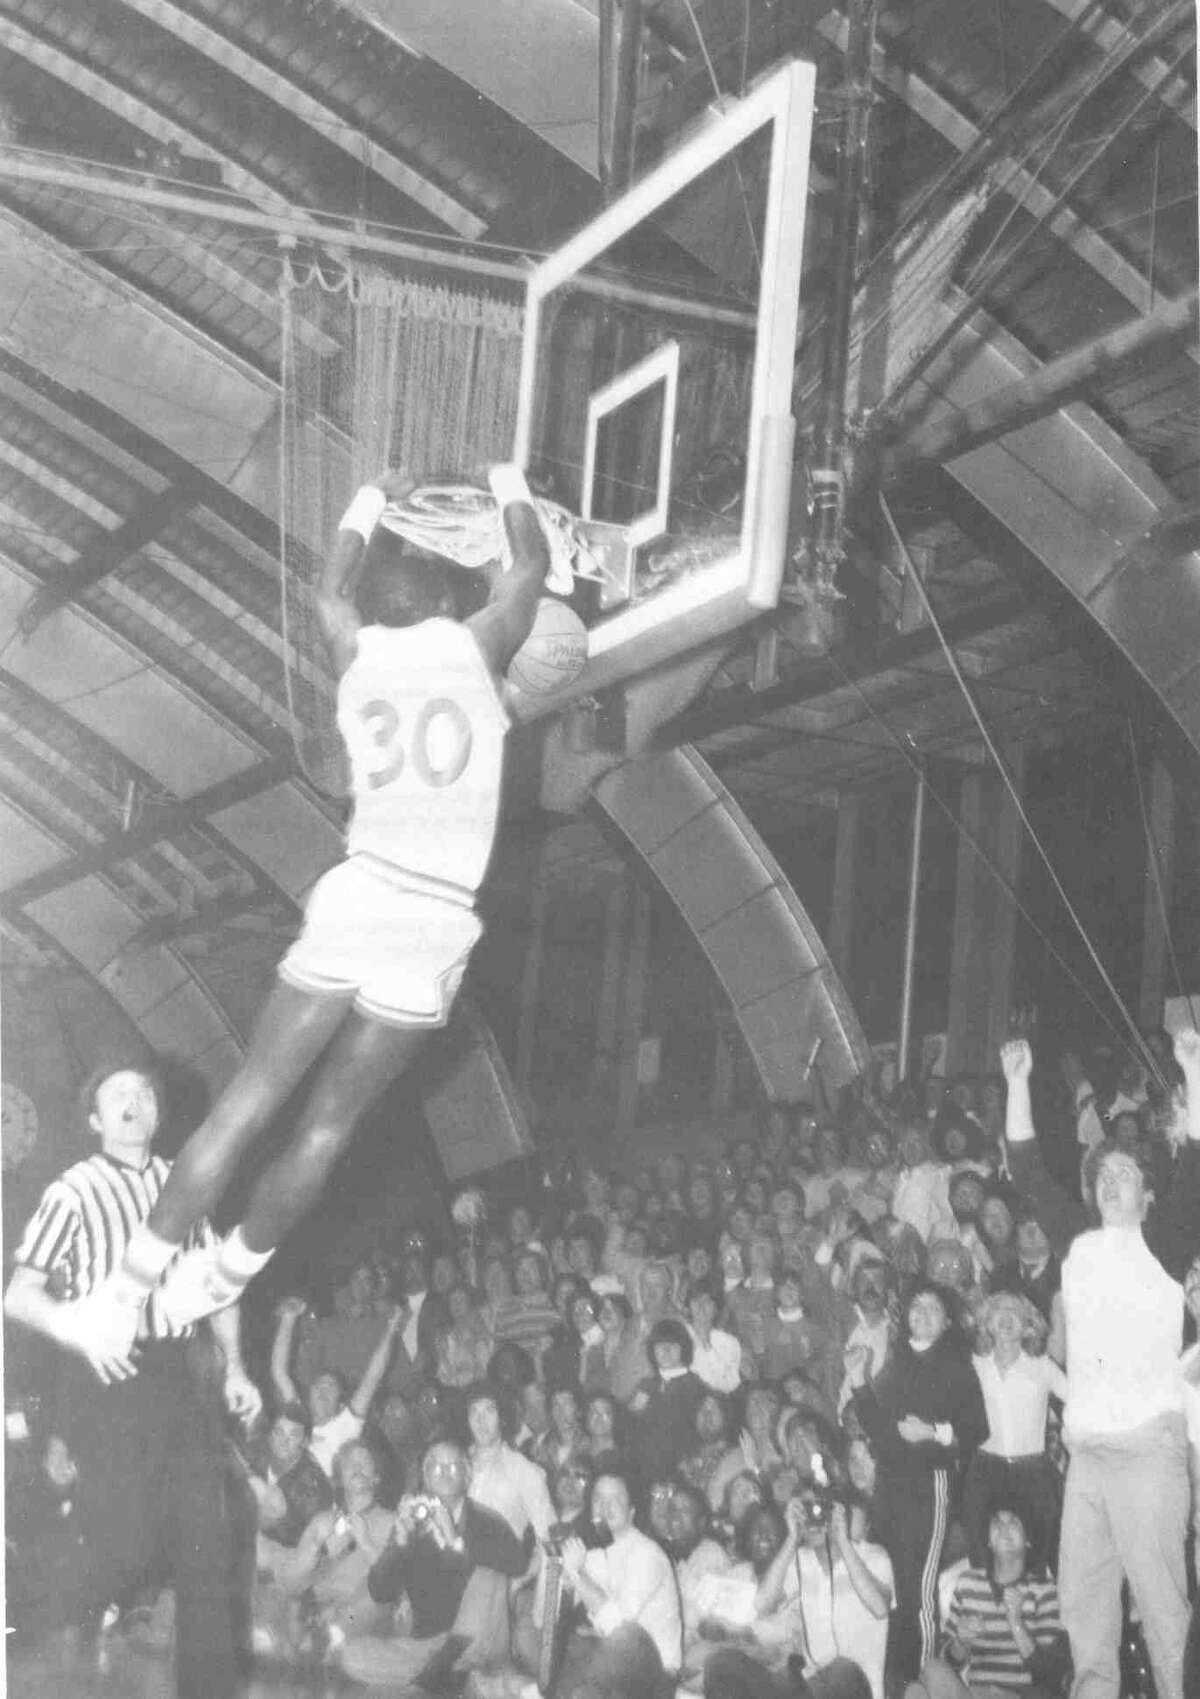 Norman Bailey shows off his signature dunk.